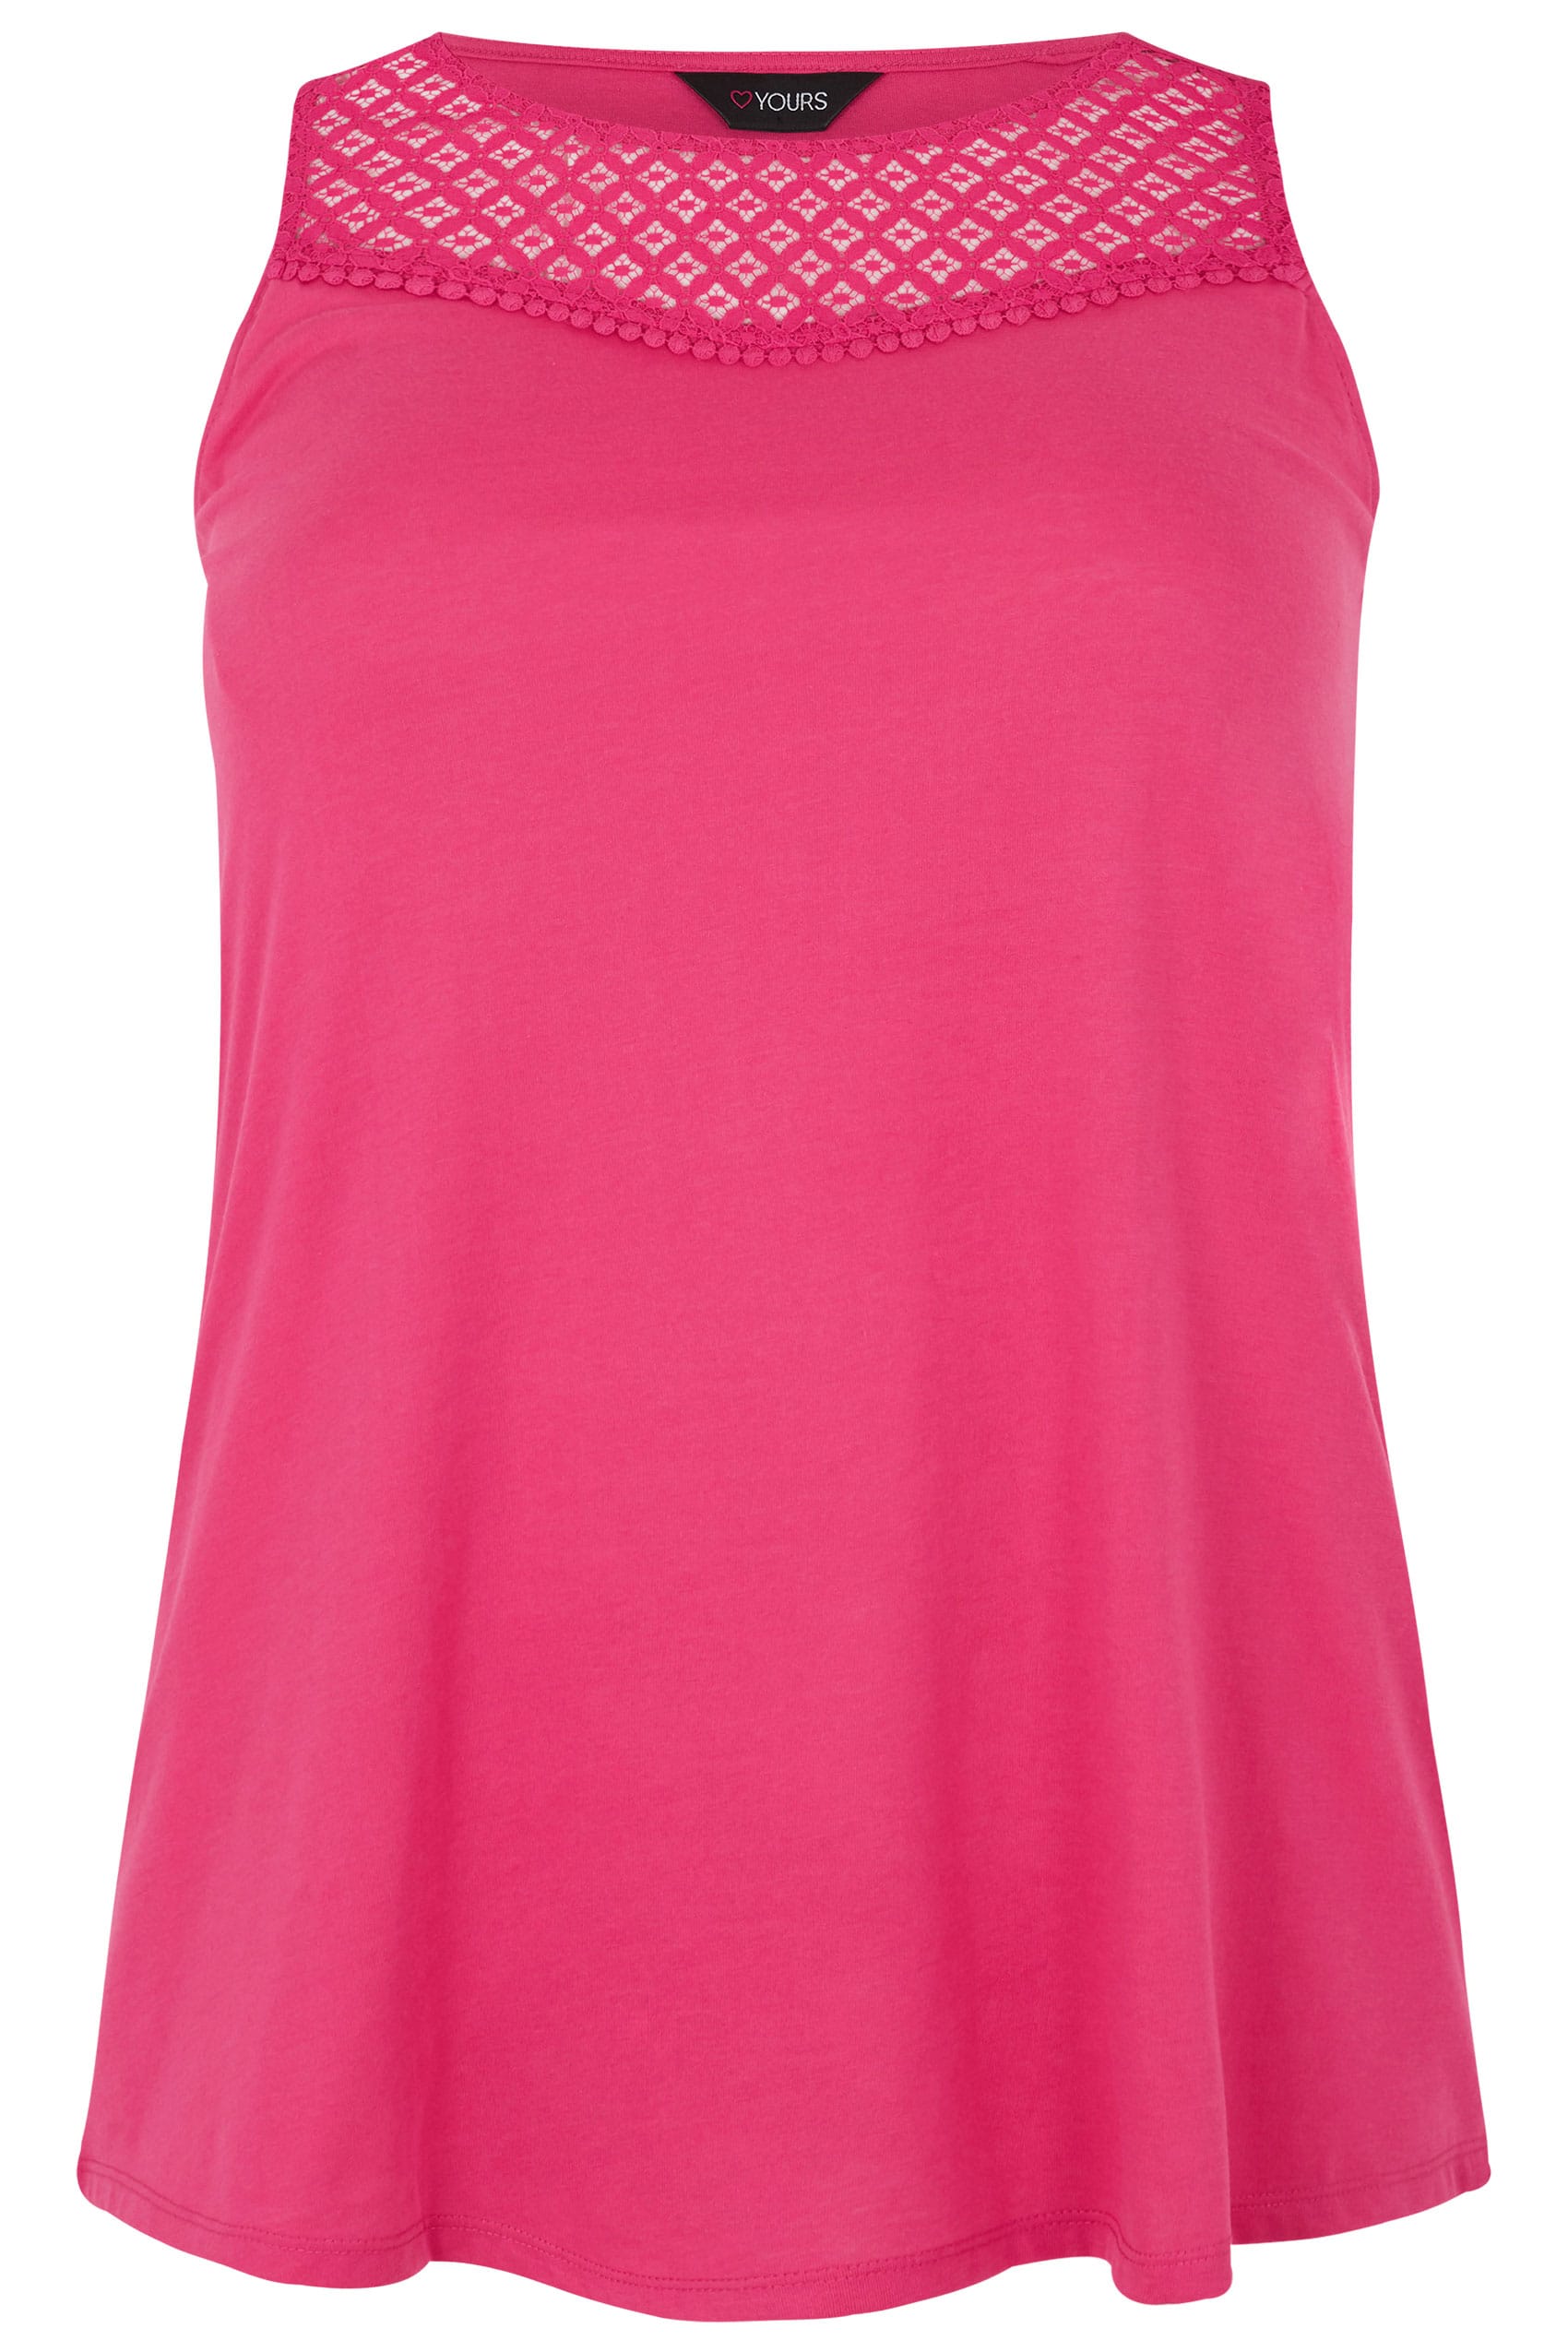 Pink Sleeveless Top With Lace Yoke, plus size 16 to 36